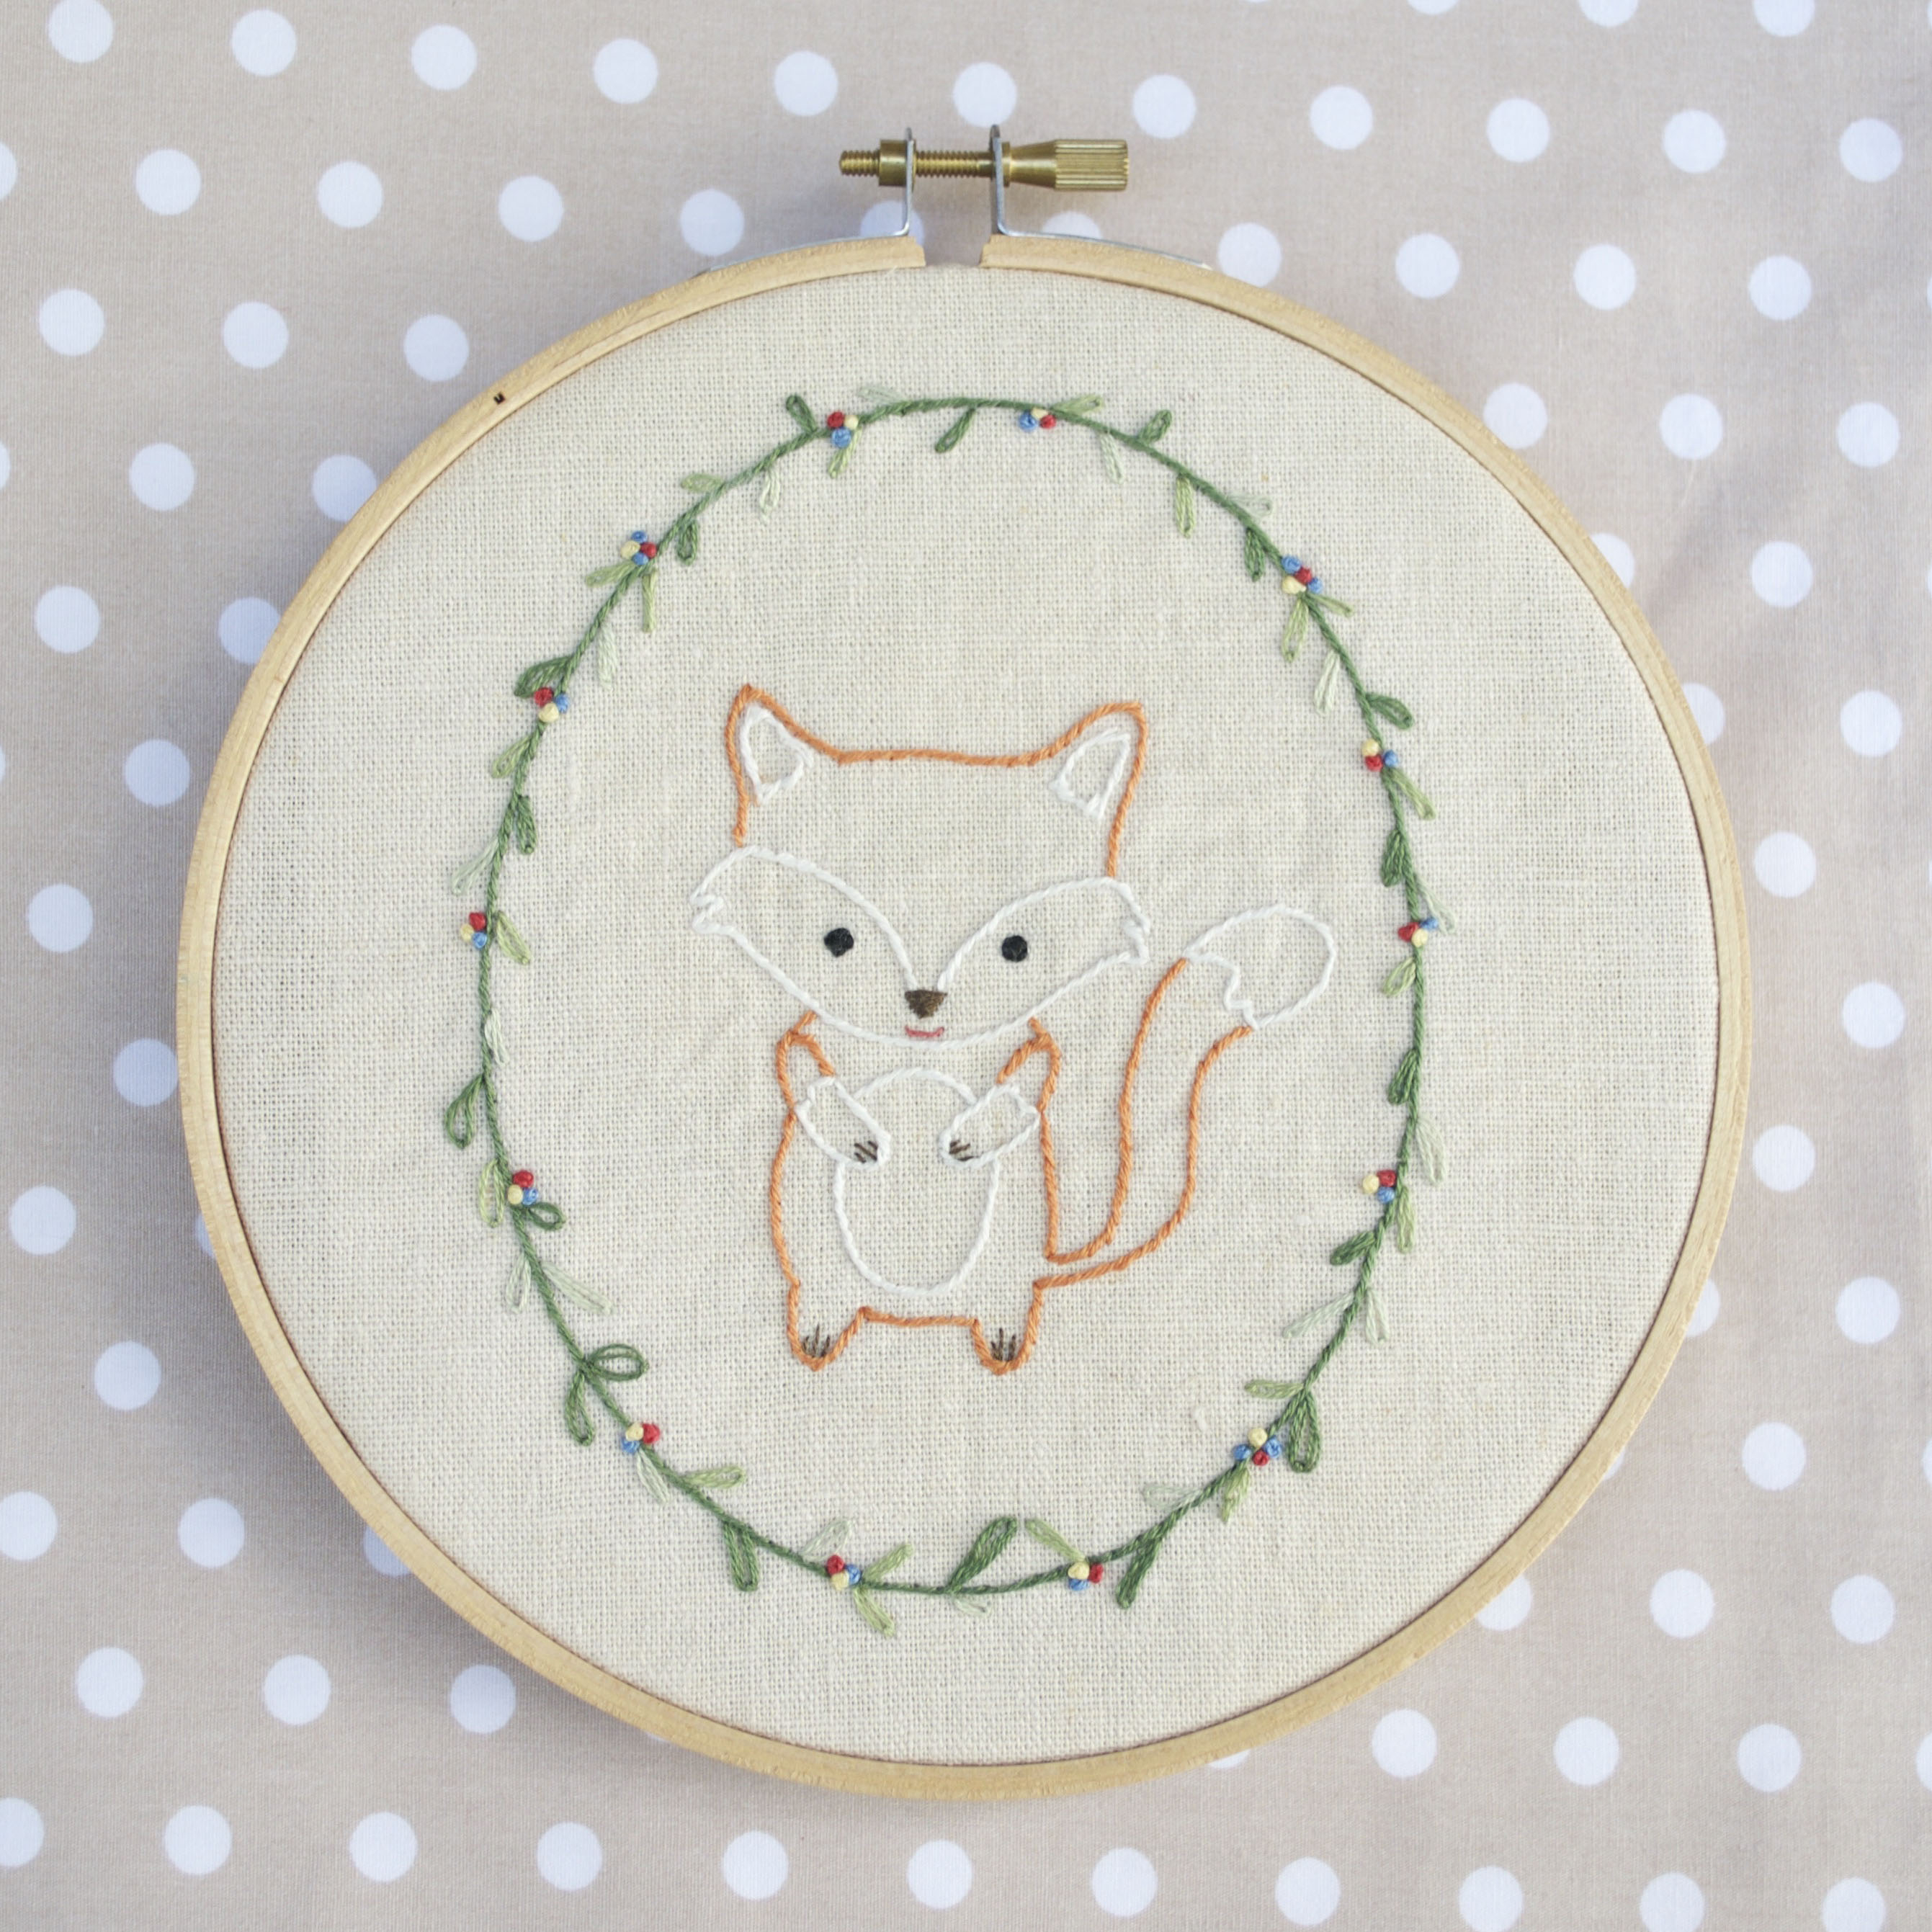 Cool Embroidery Patterns Little Fox Hand Embroidery Pdf Pattern Instructions